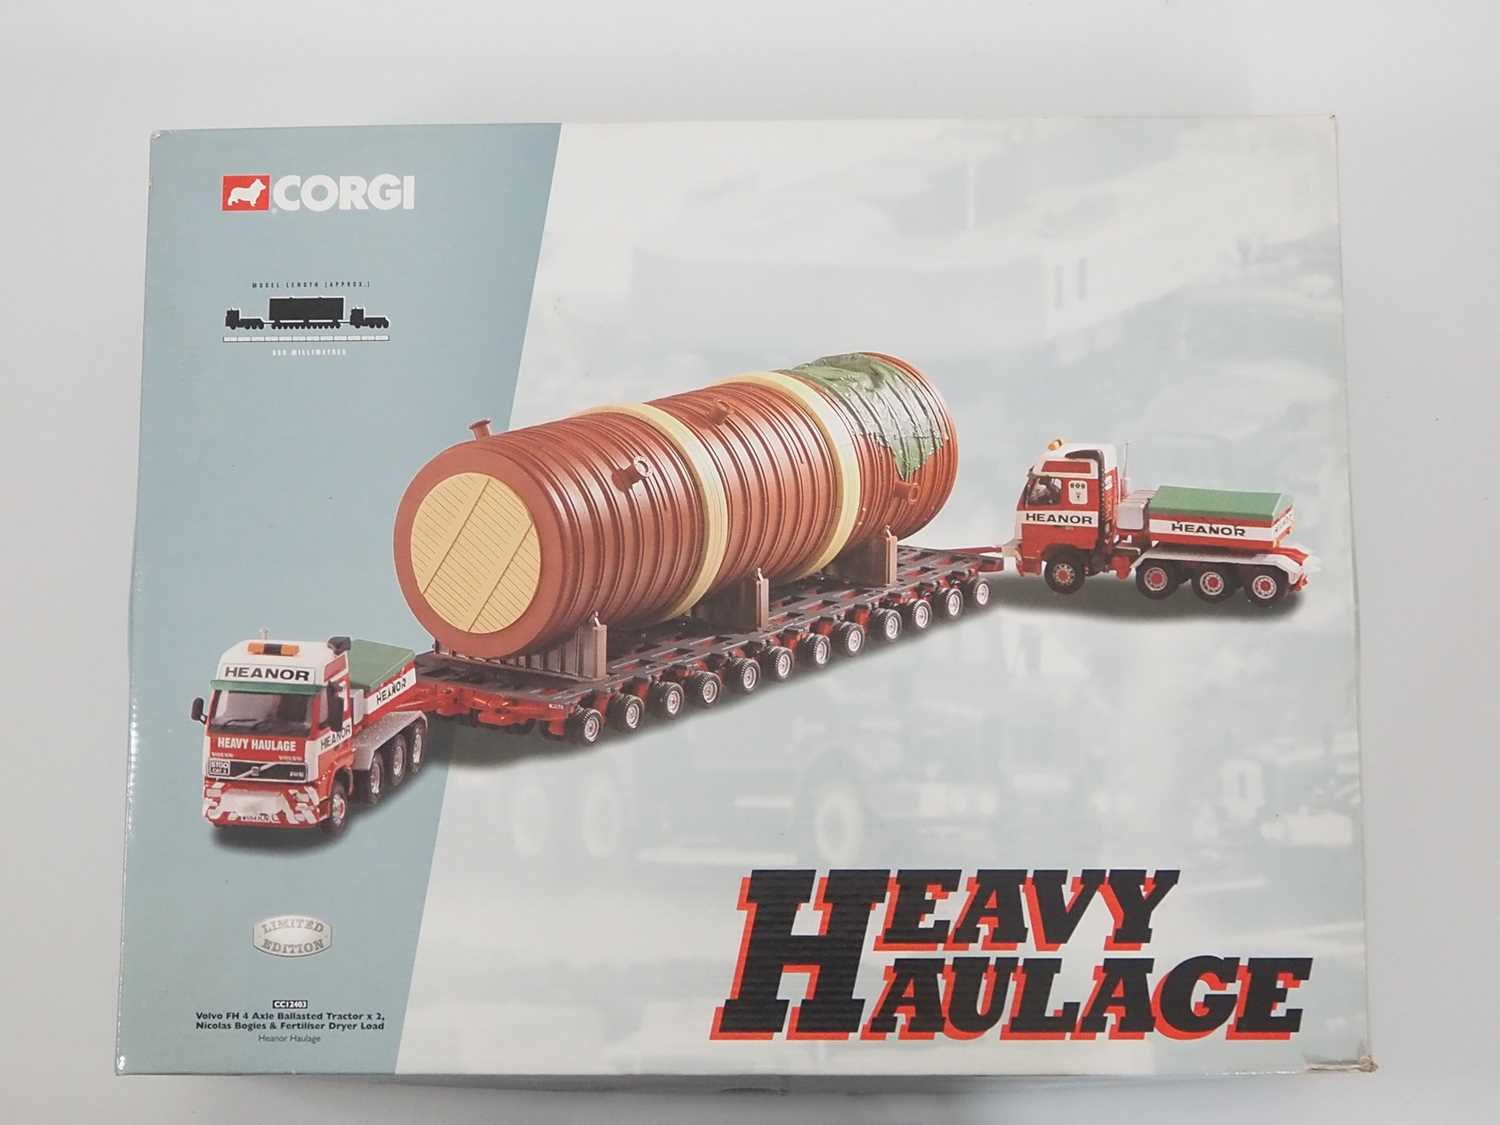 A CORGI 1:50 scale CC12403 Heavy Haulage set in Heanor livery - appears unused - VG/E in VG box - Image 4 of 5